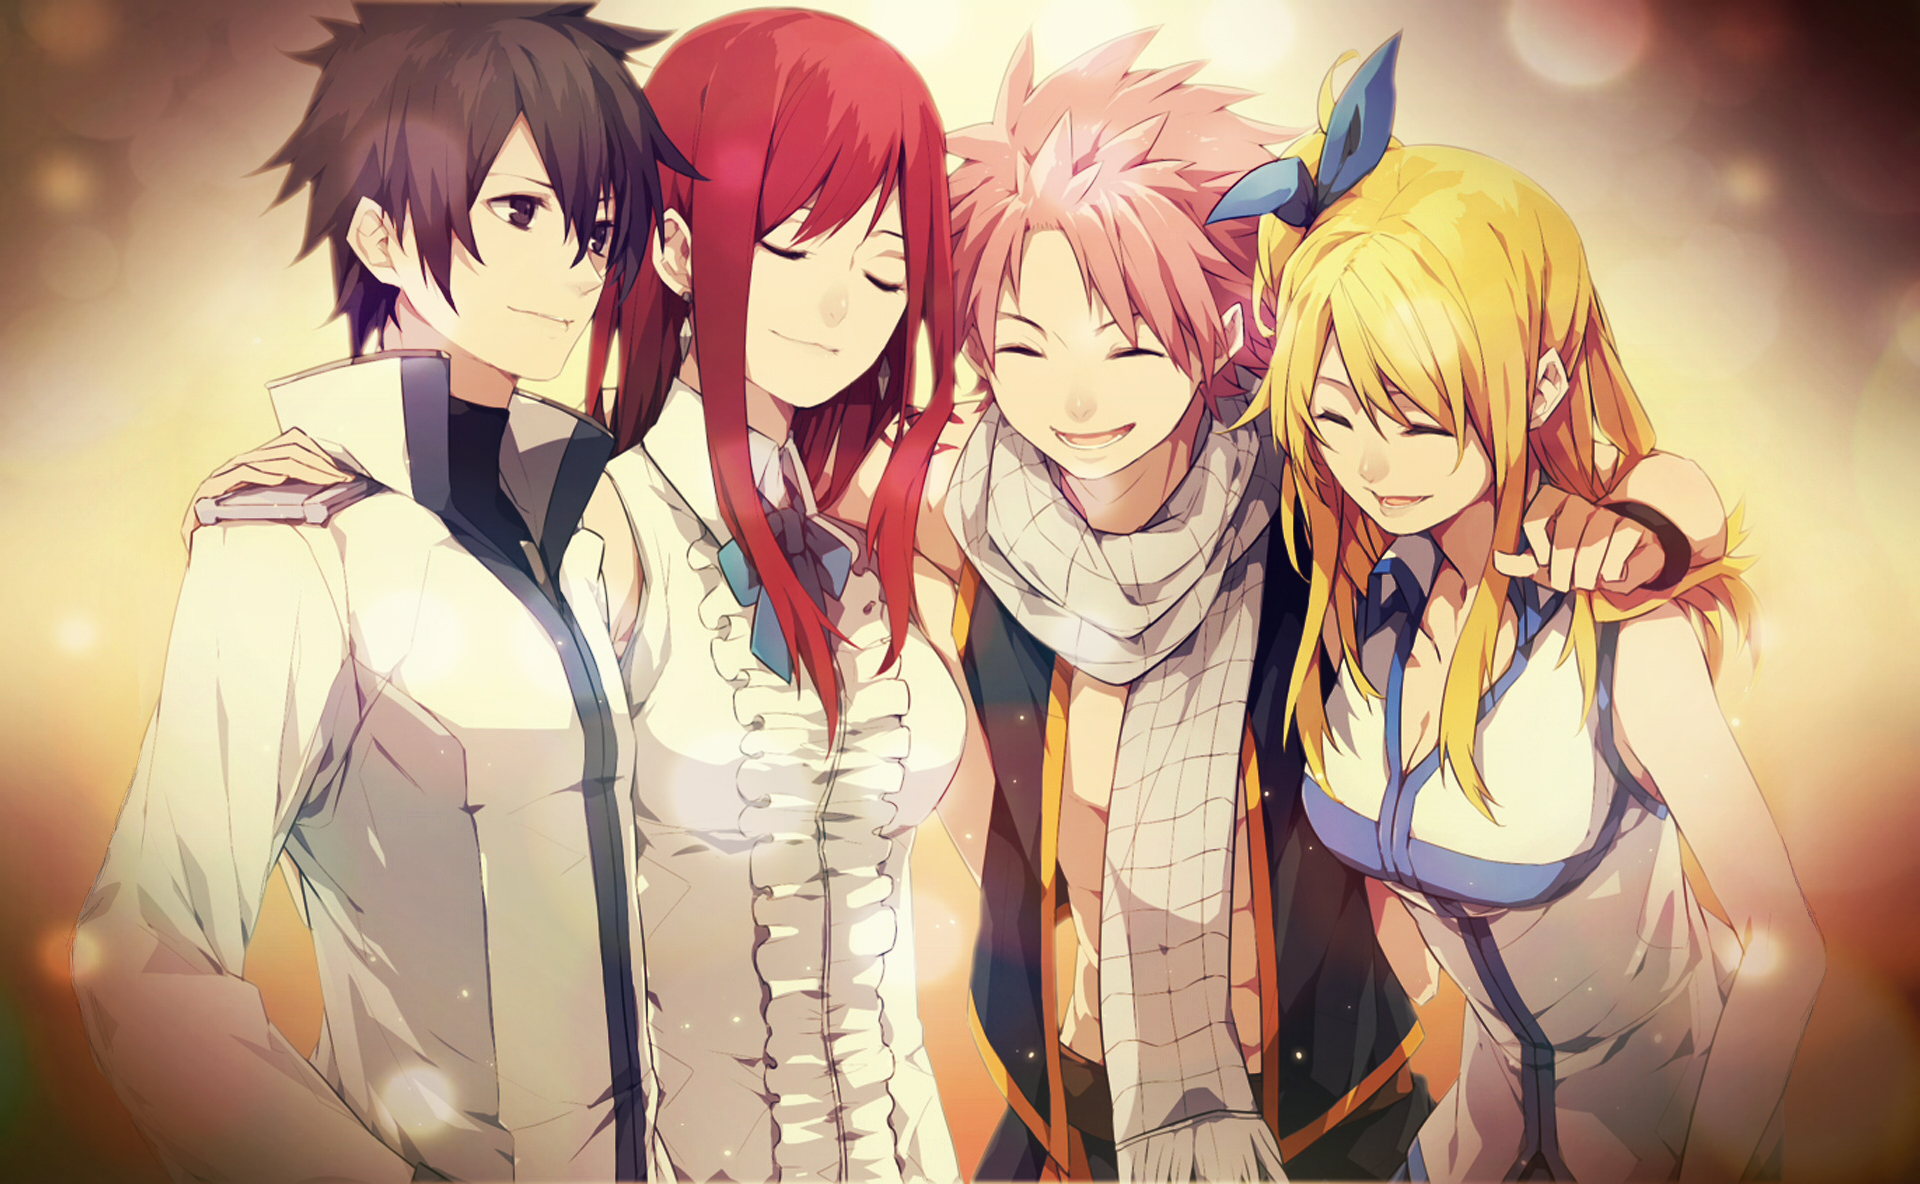 anime, blonde, erza scarlet, fairy tail, gray fullbuster, lucy heartfilia, natsu dragneel, pink hair, red hair images